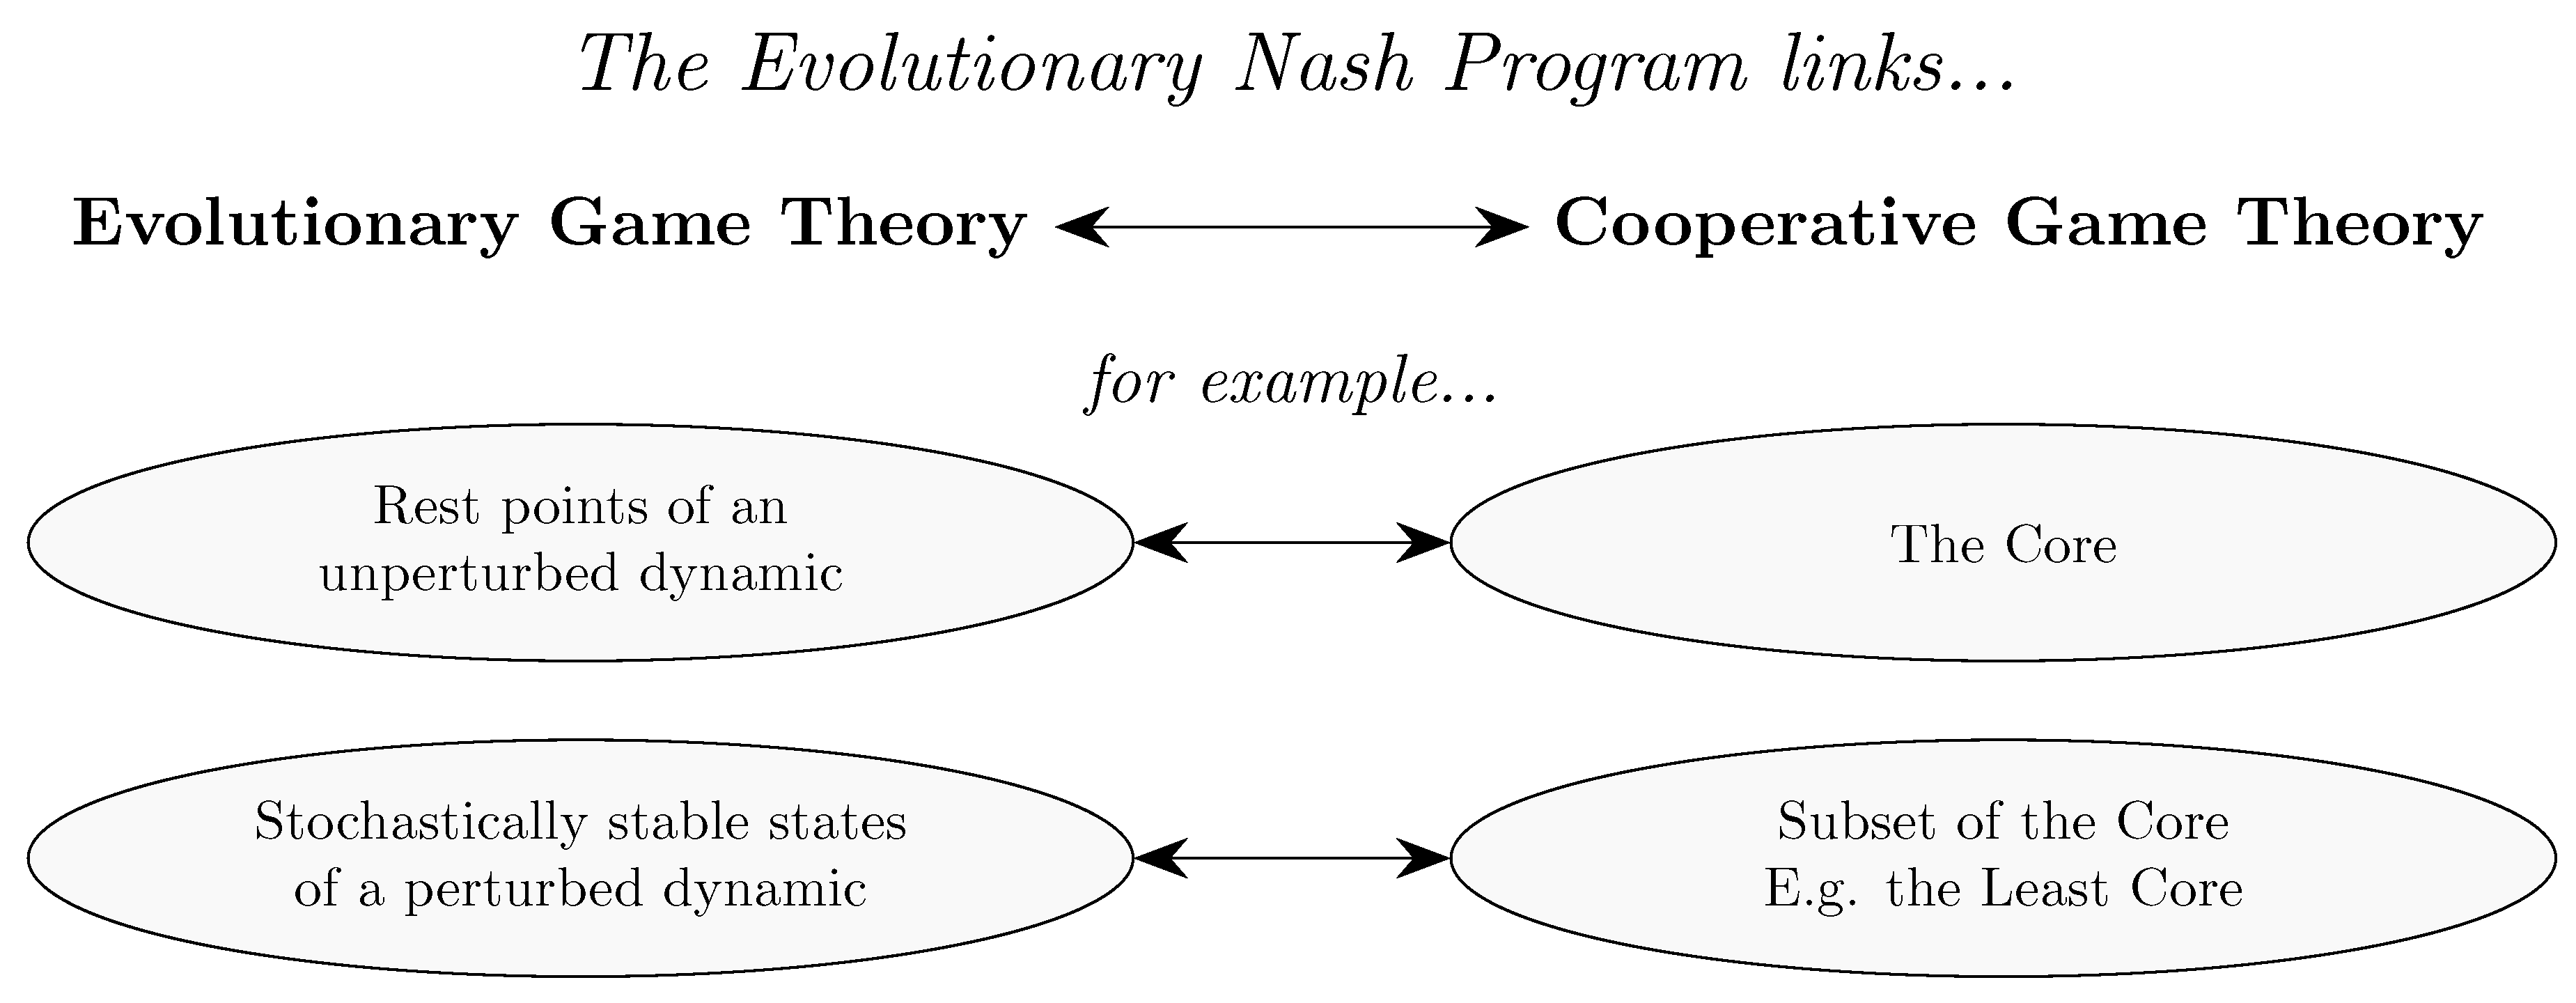 How to Triumph and Cooperate in Game Theory and Evolution